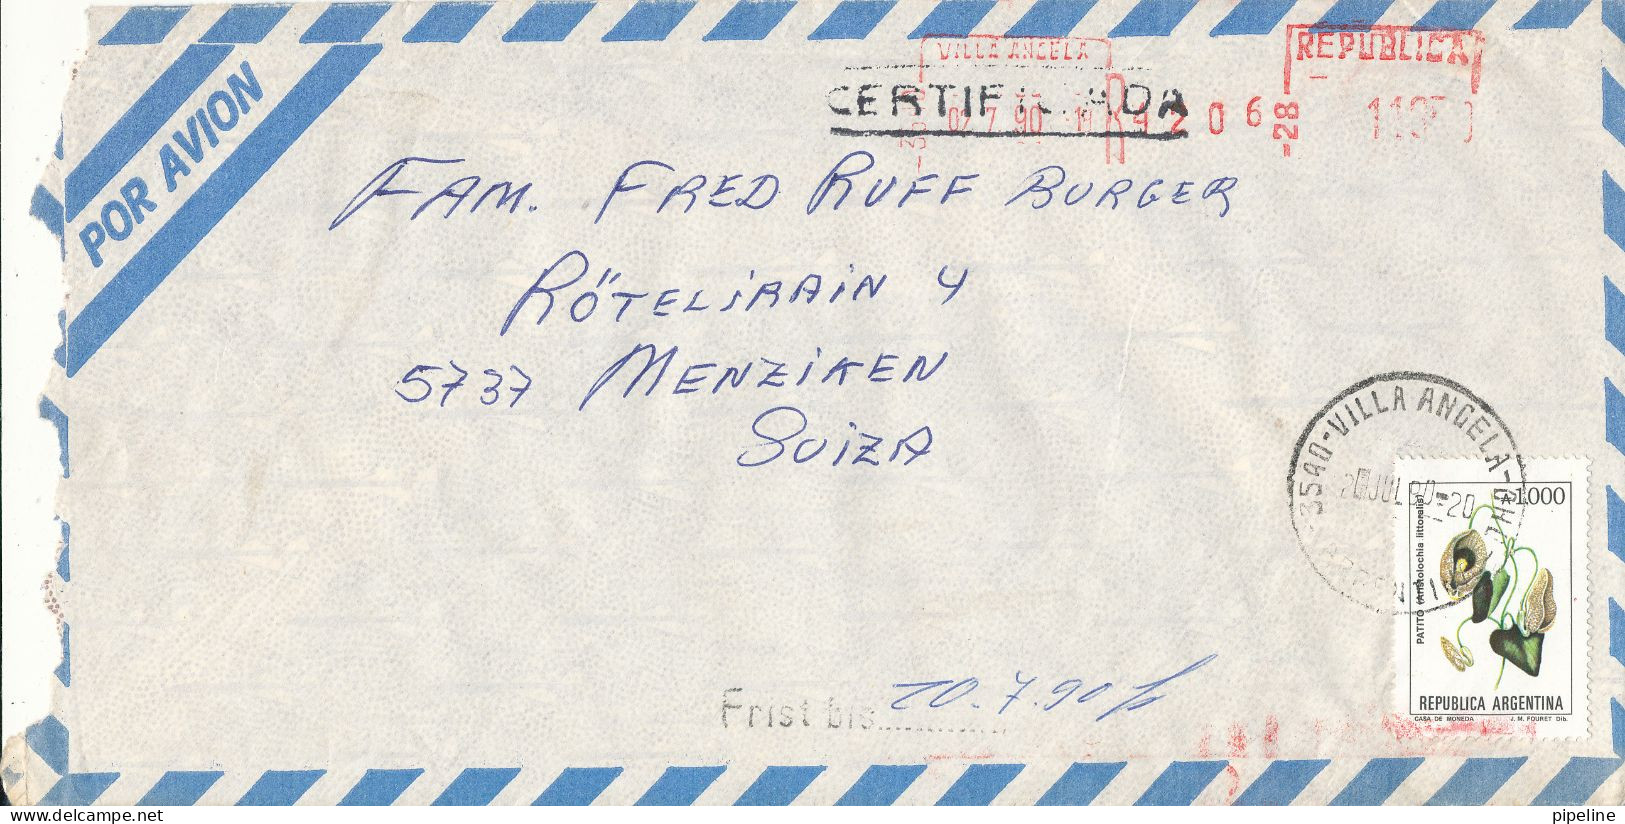 Argentina Registered Air Mail Cover With Meter Cancel And Stamp Sent To Switzerland Villa Angela 2-7-1990 Topic Stamp - Poste Aérienne